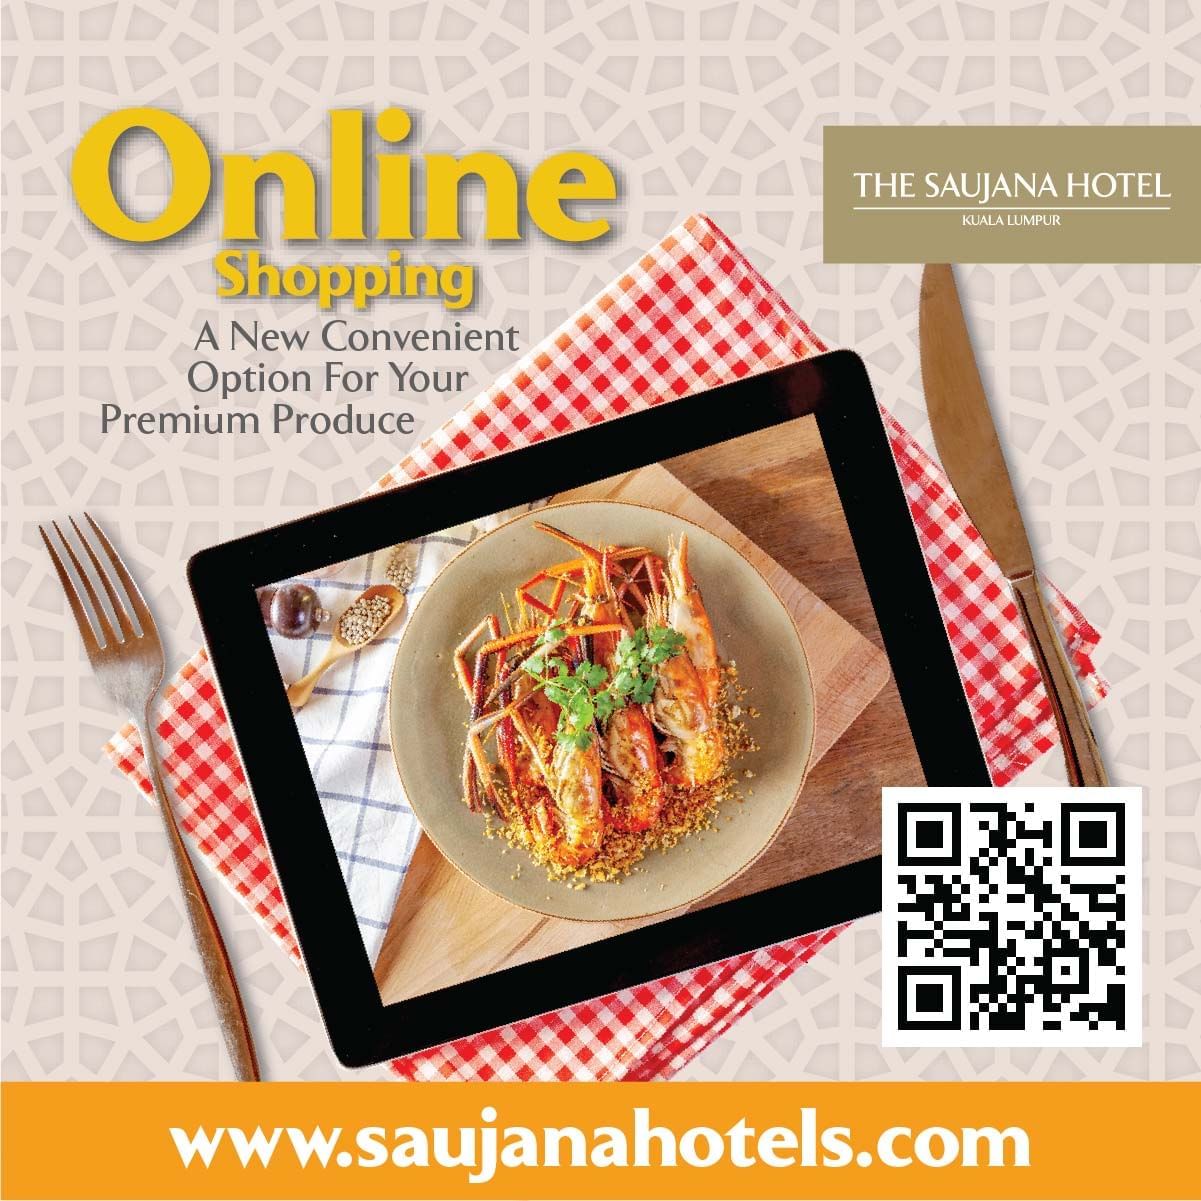 A poster for November 2020 - The Saujana Hotel Kuala Lumpur has launched Online Shopping services